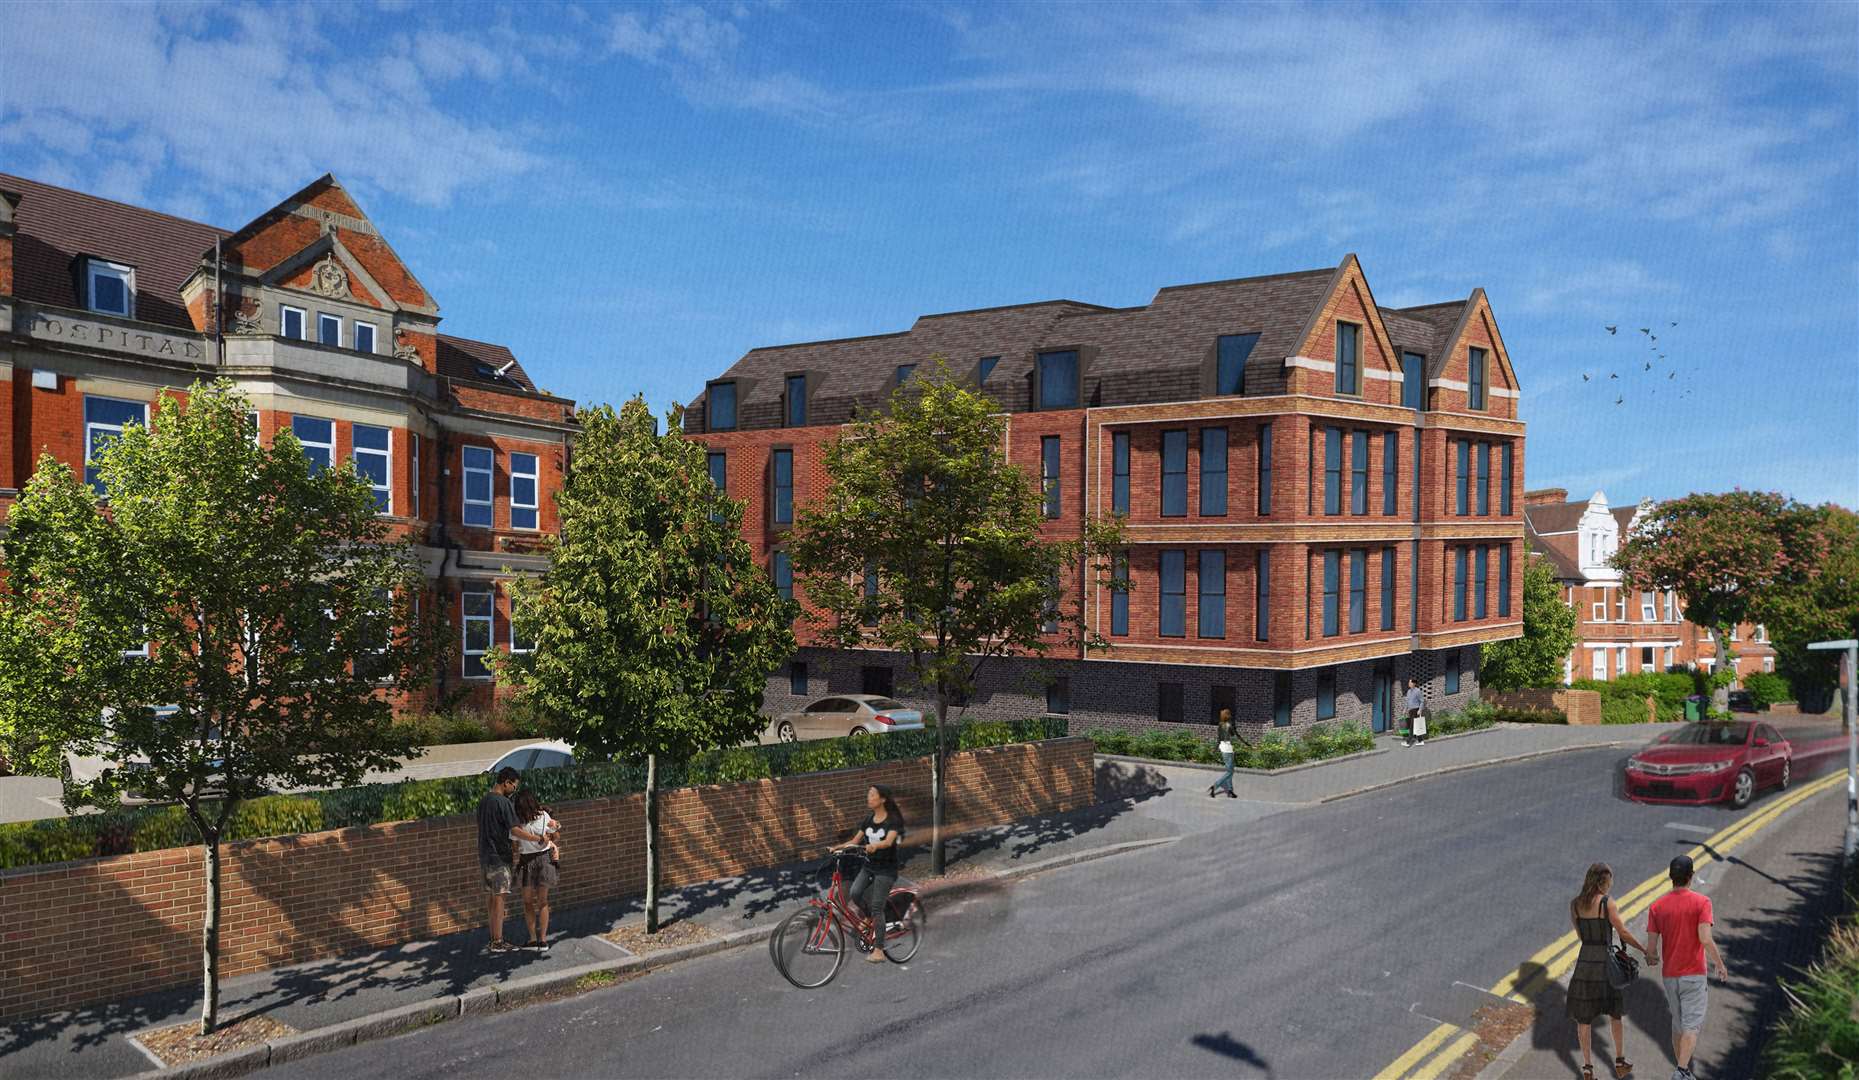 The block of apartments will sit next to the existing main hospital building, which is also being turned into 18 flats. Picture: Hollaway